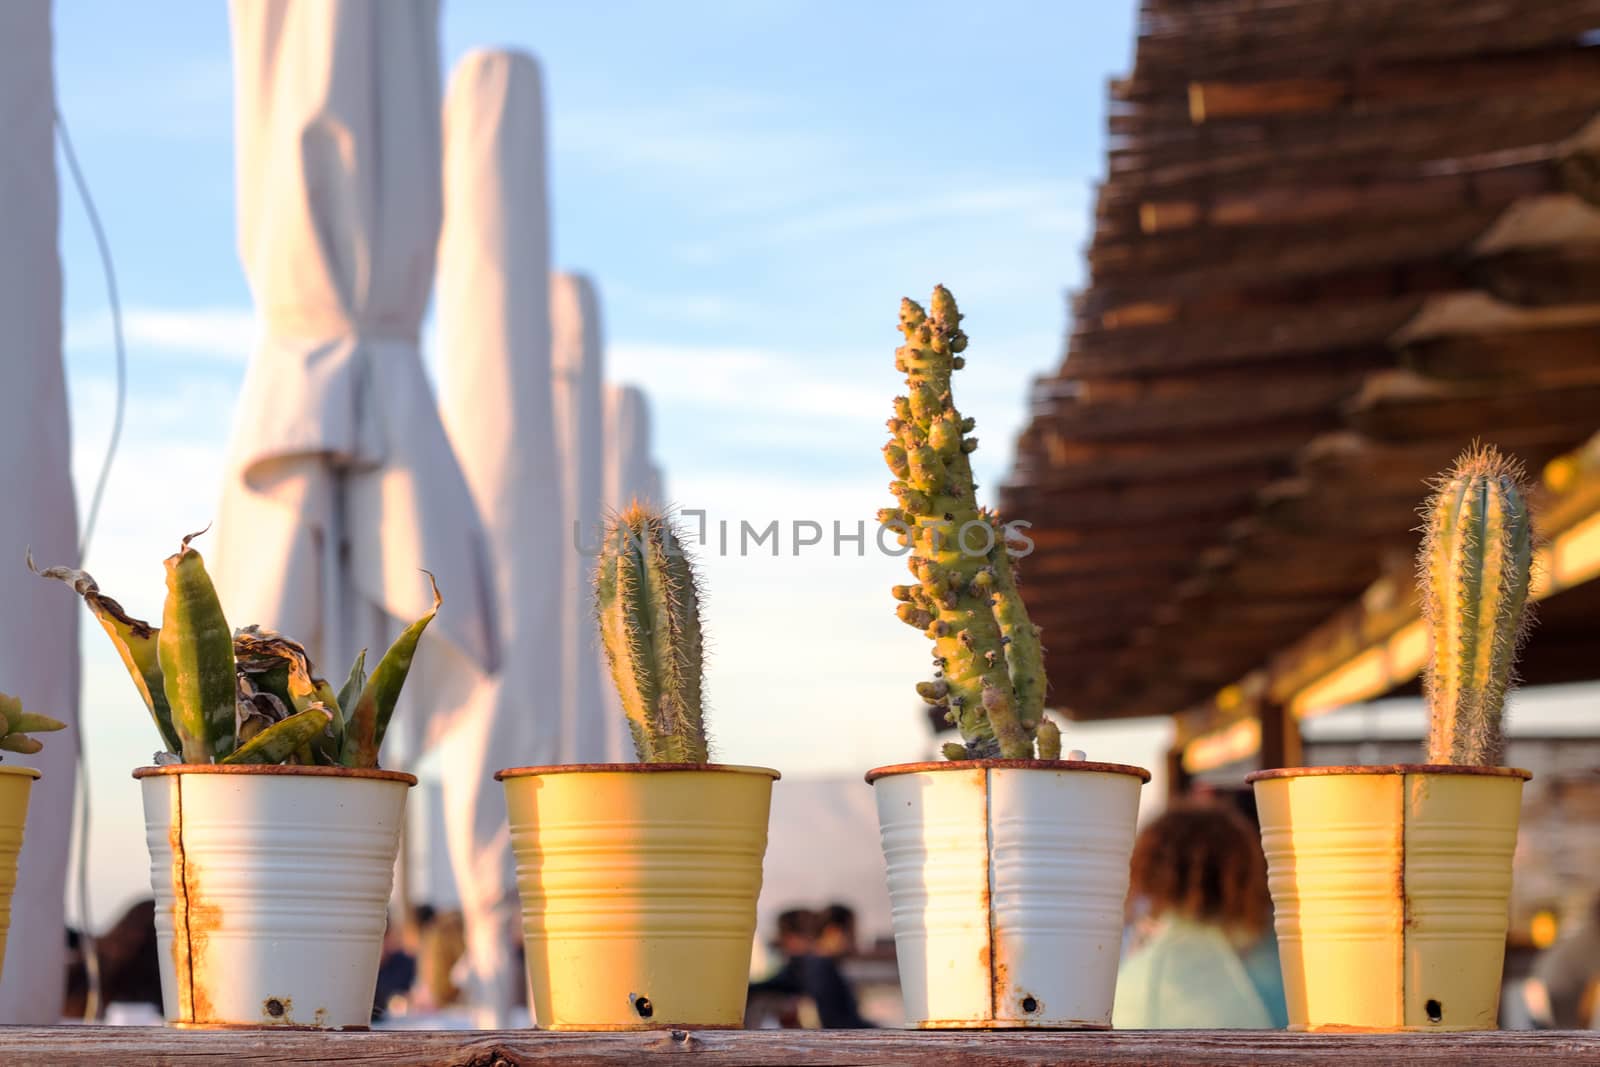 Line of cactus at the beach bar by noimagination